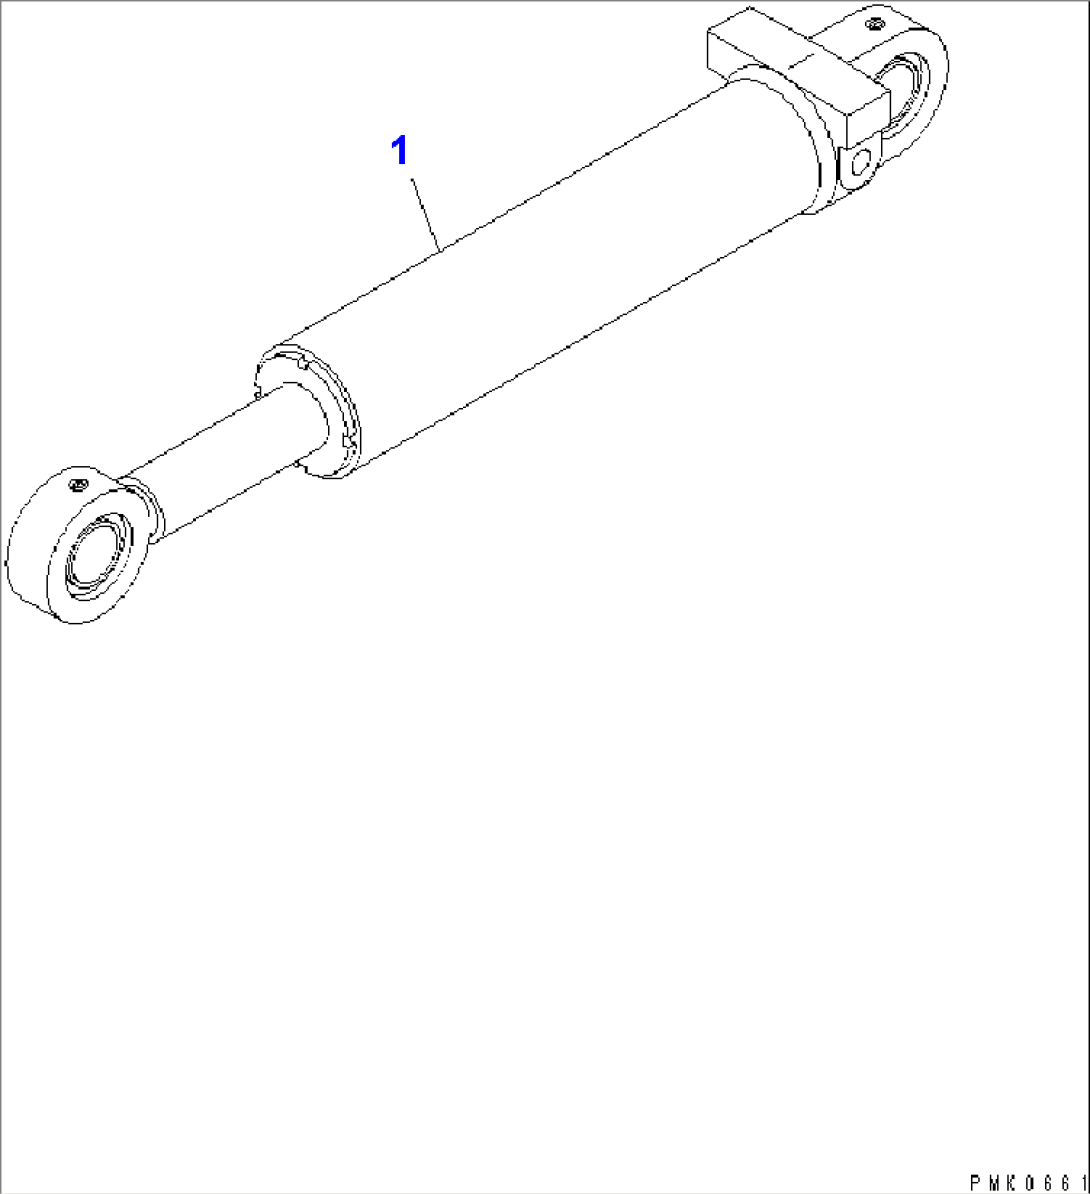 OUTRIGGER CYLINDER (FOR FOUR OUTRIGGER)